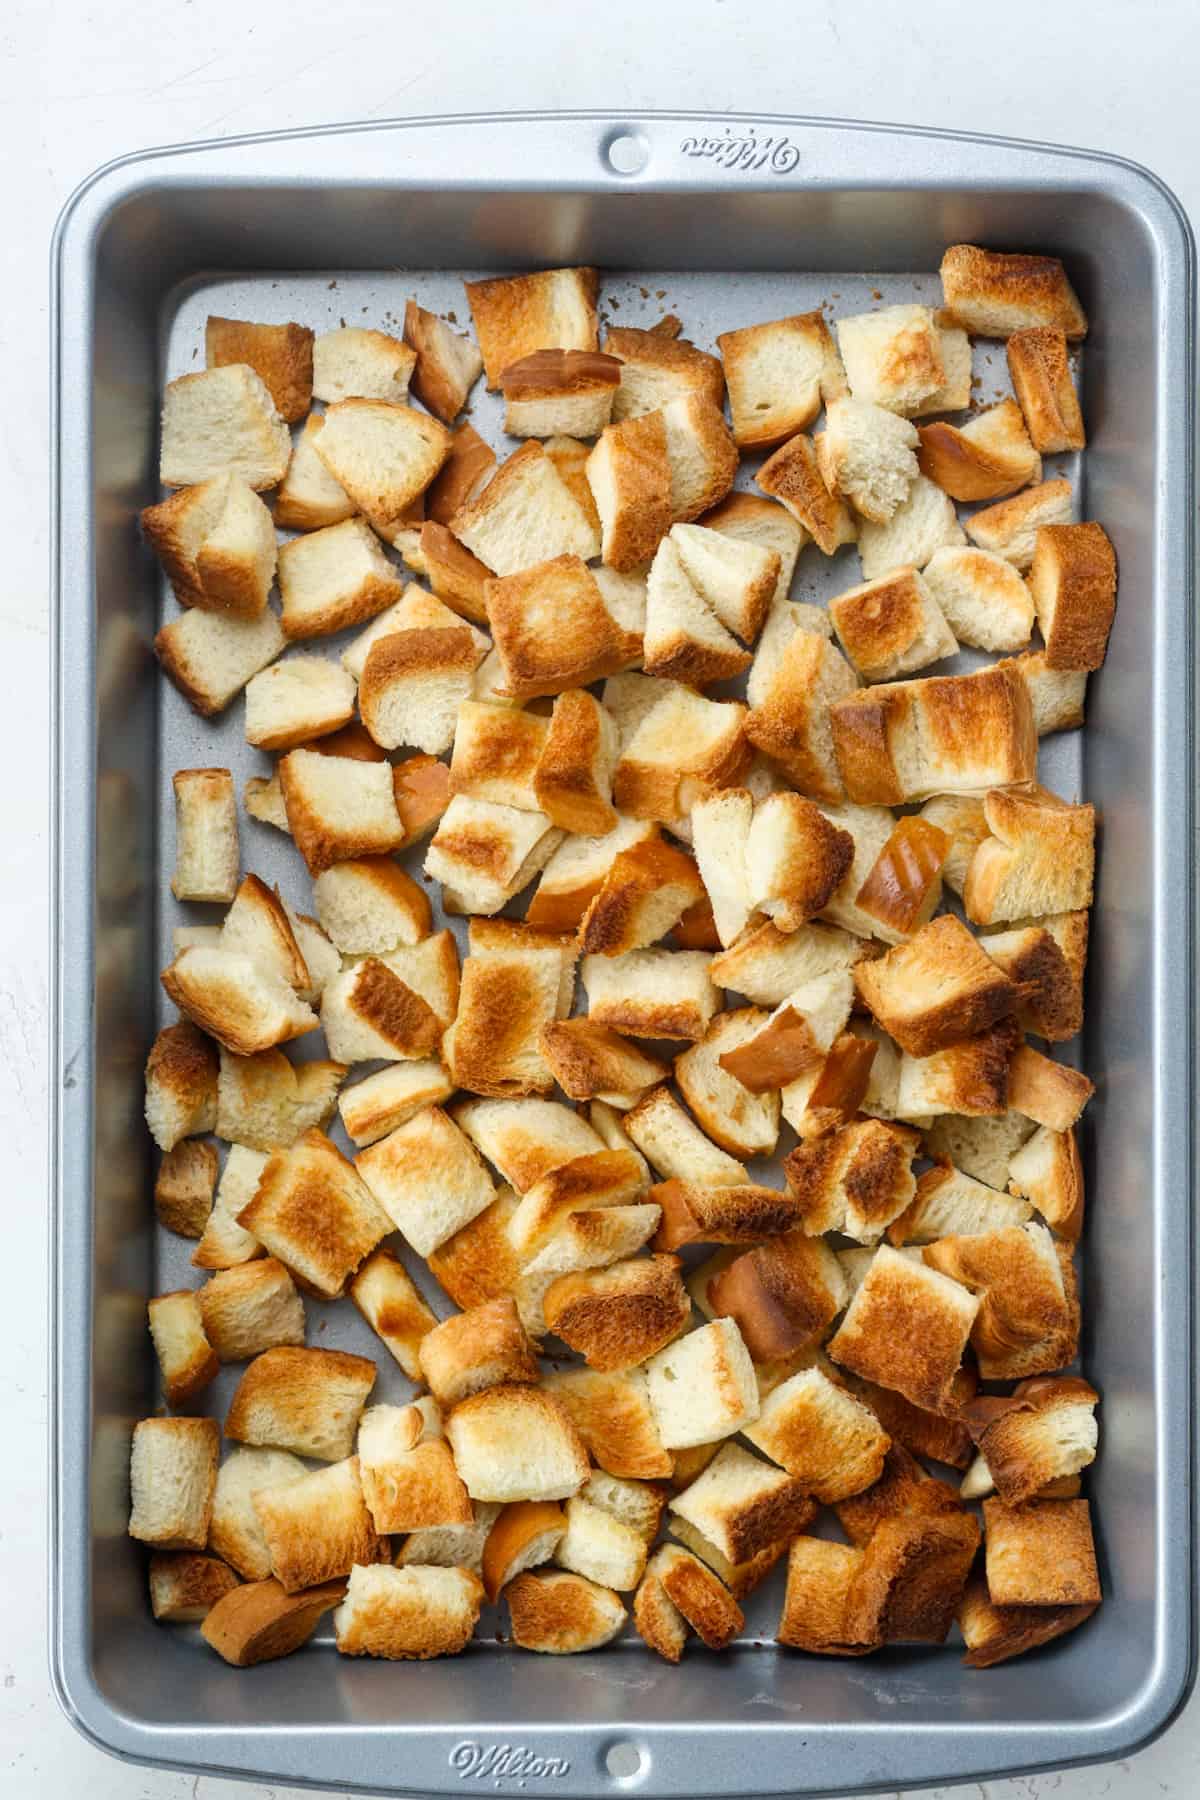 Homemade croutons in pan.